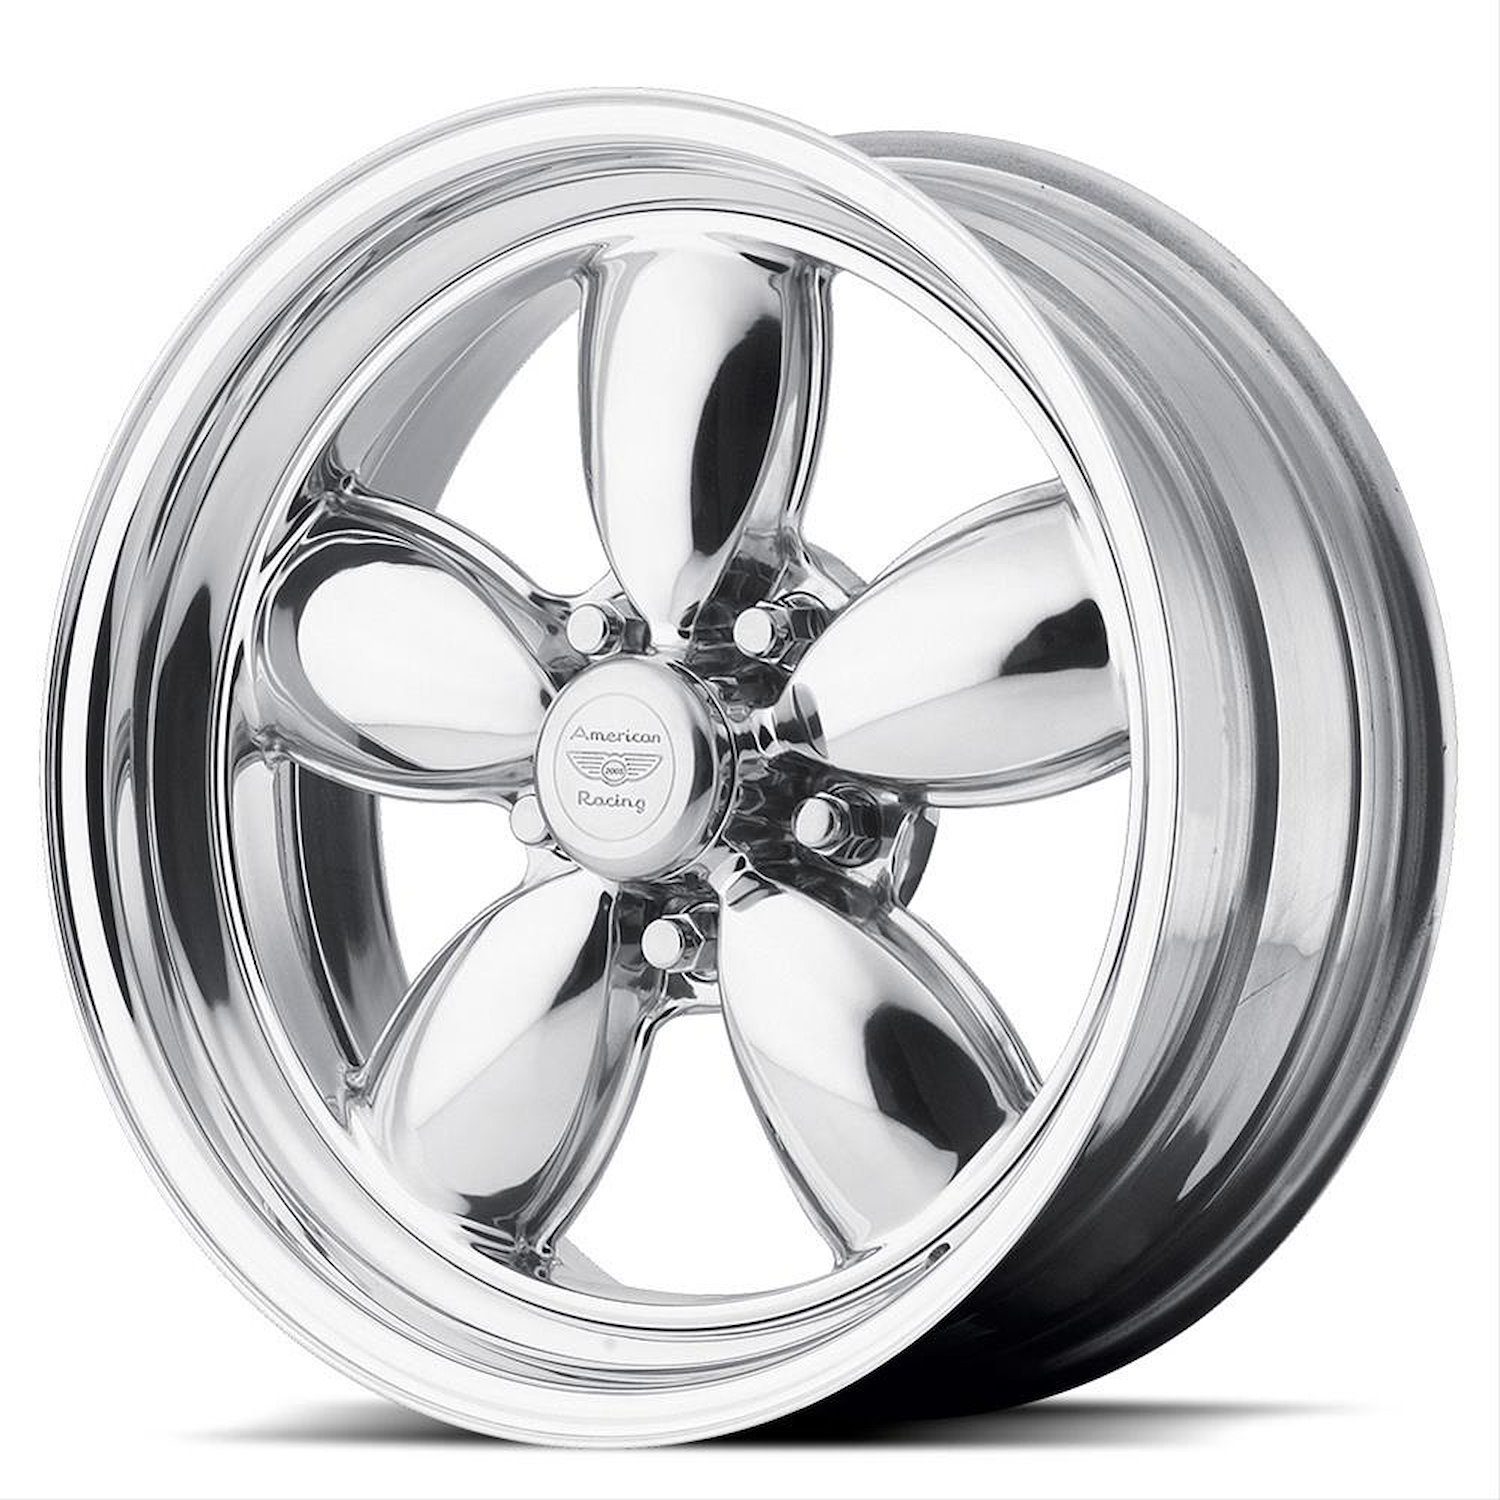 AMERICAN RACING CLASSIC 200S TWO-PIECE POLISHED 17 x 11 5X4.75 44 7.73